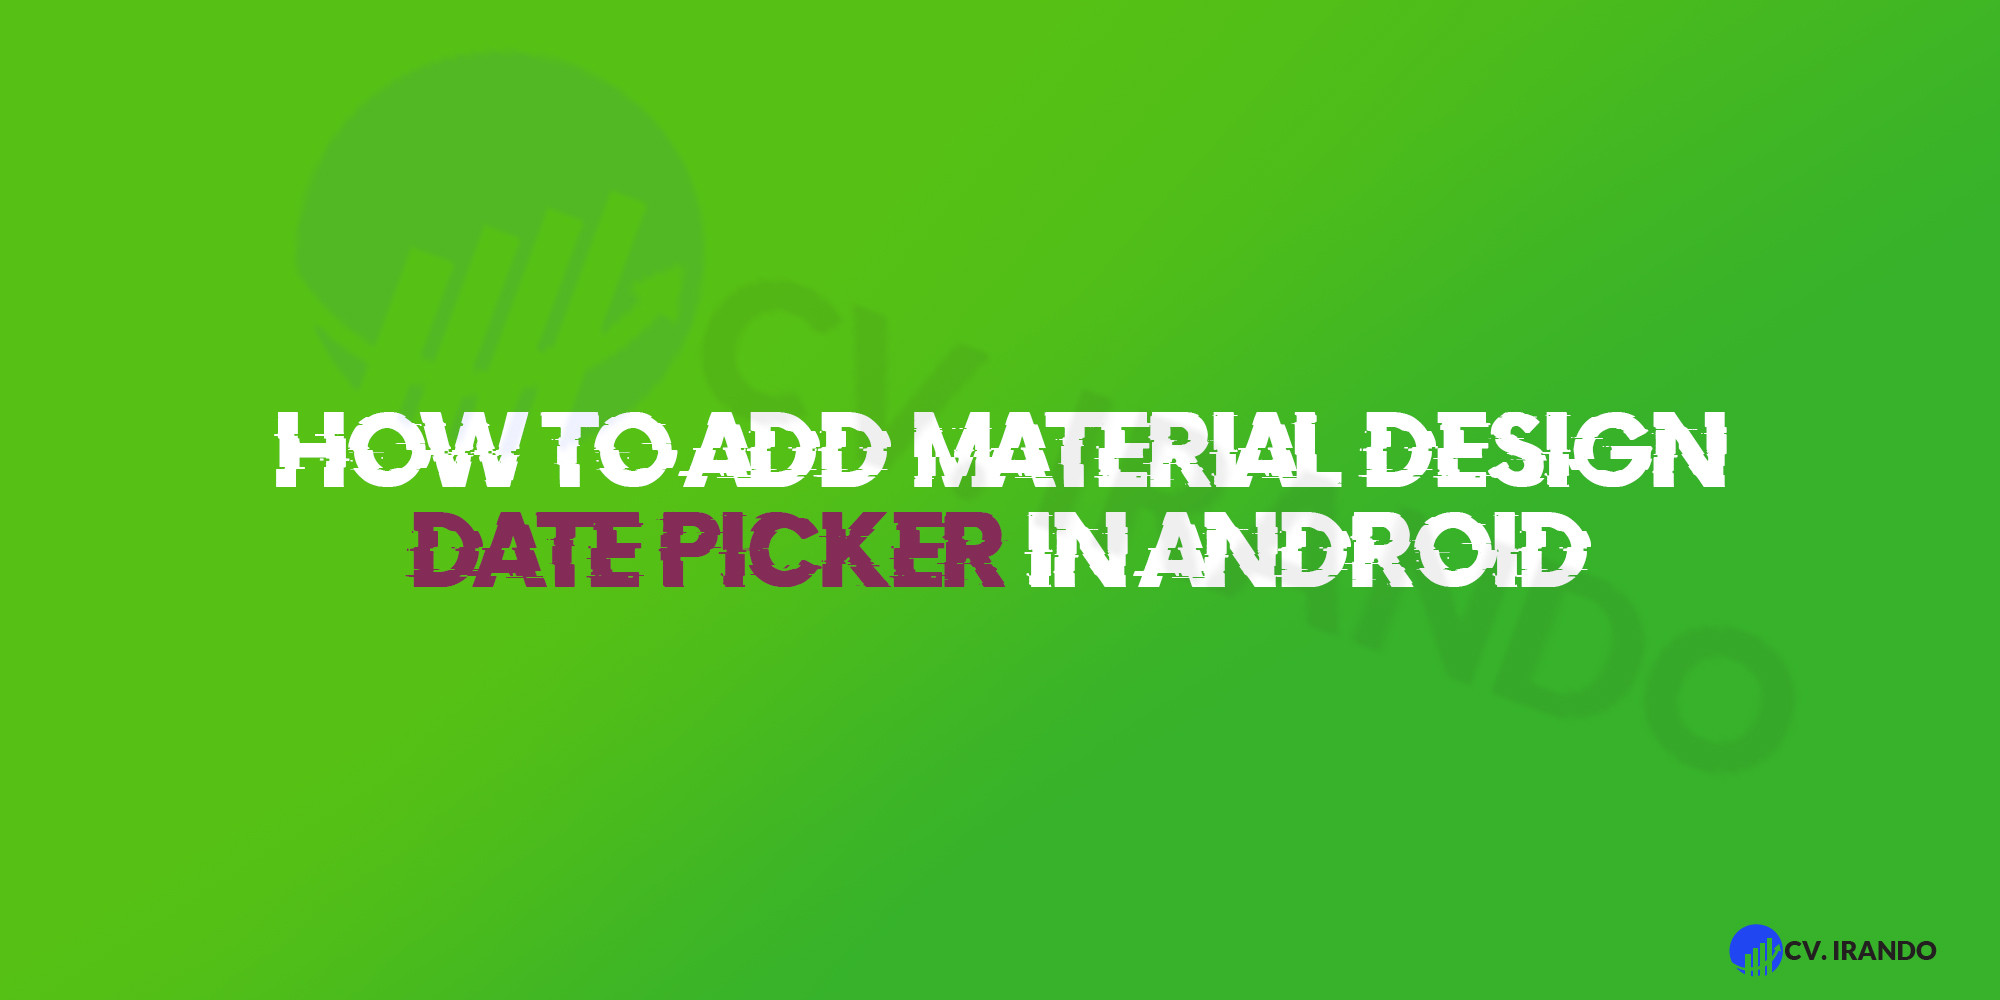 How To Add Material Design Date Picker in Android